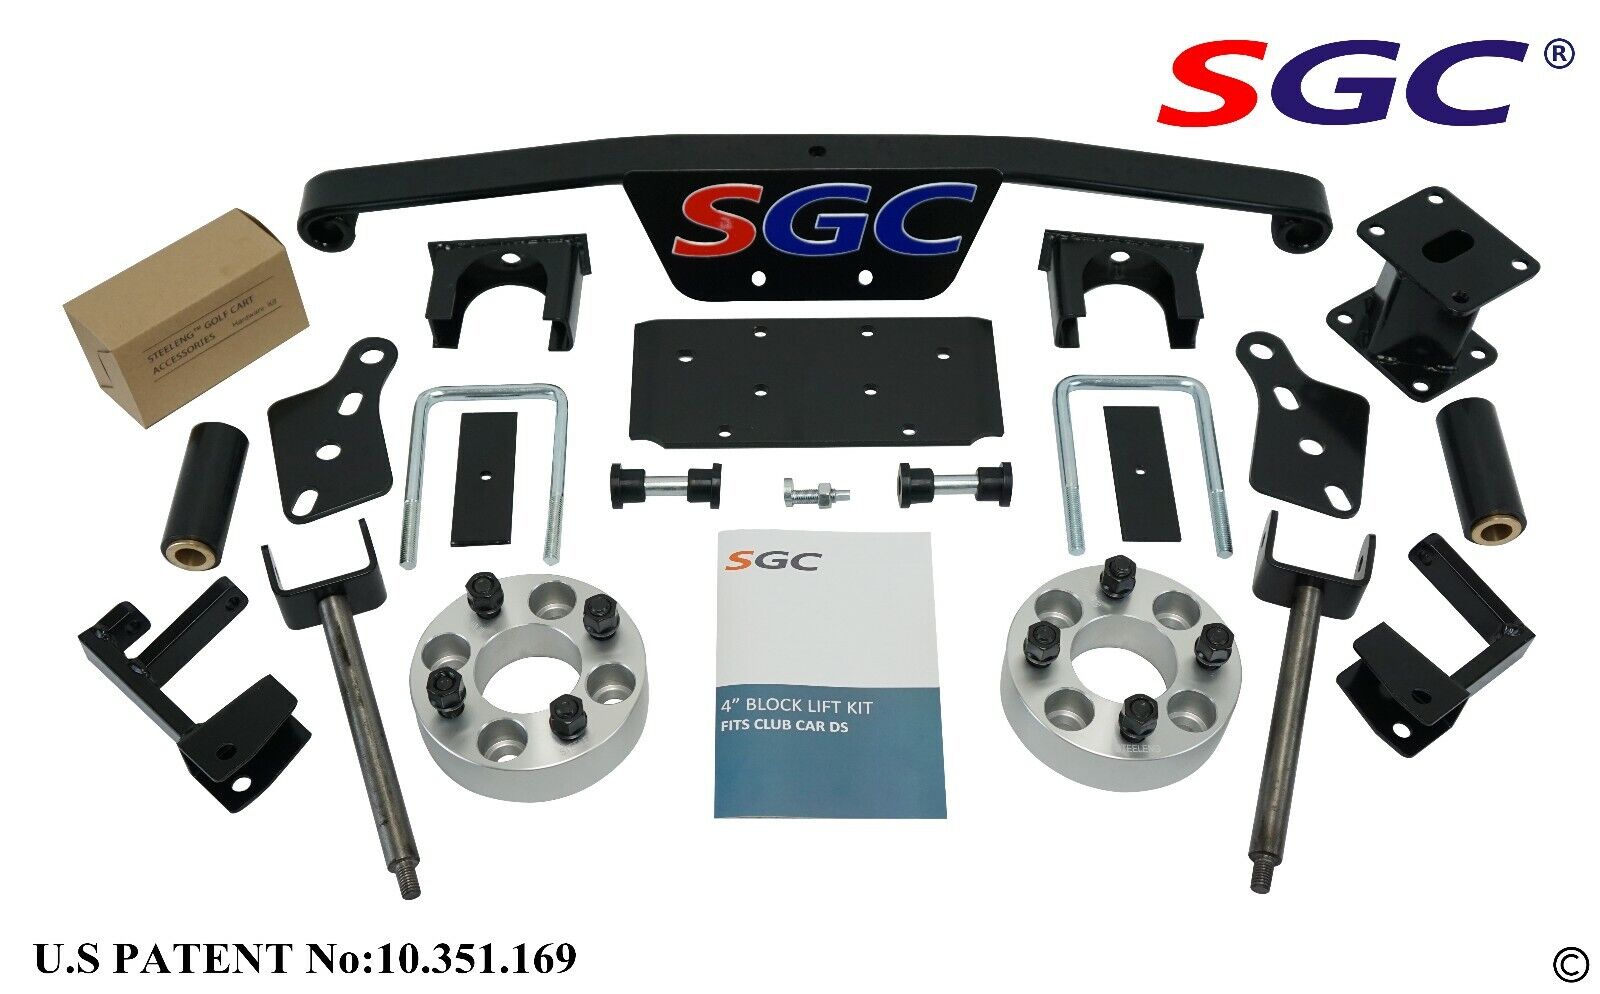 SGC 4" SPINDLE EXTENSION LIFT KIT FOR CLUB CAR GOLF CART DS MODEL (1993-2010)